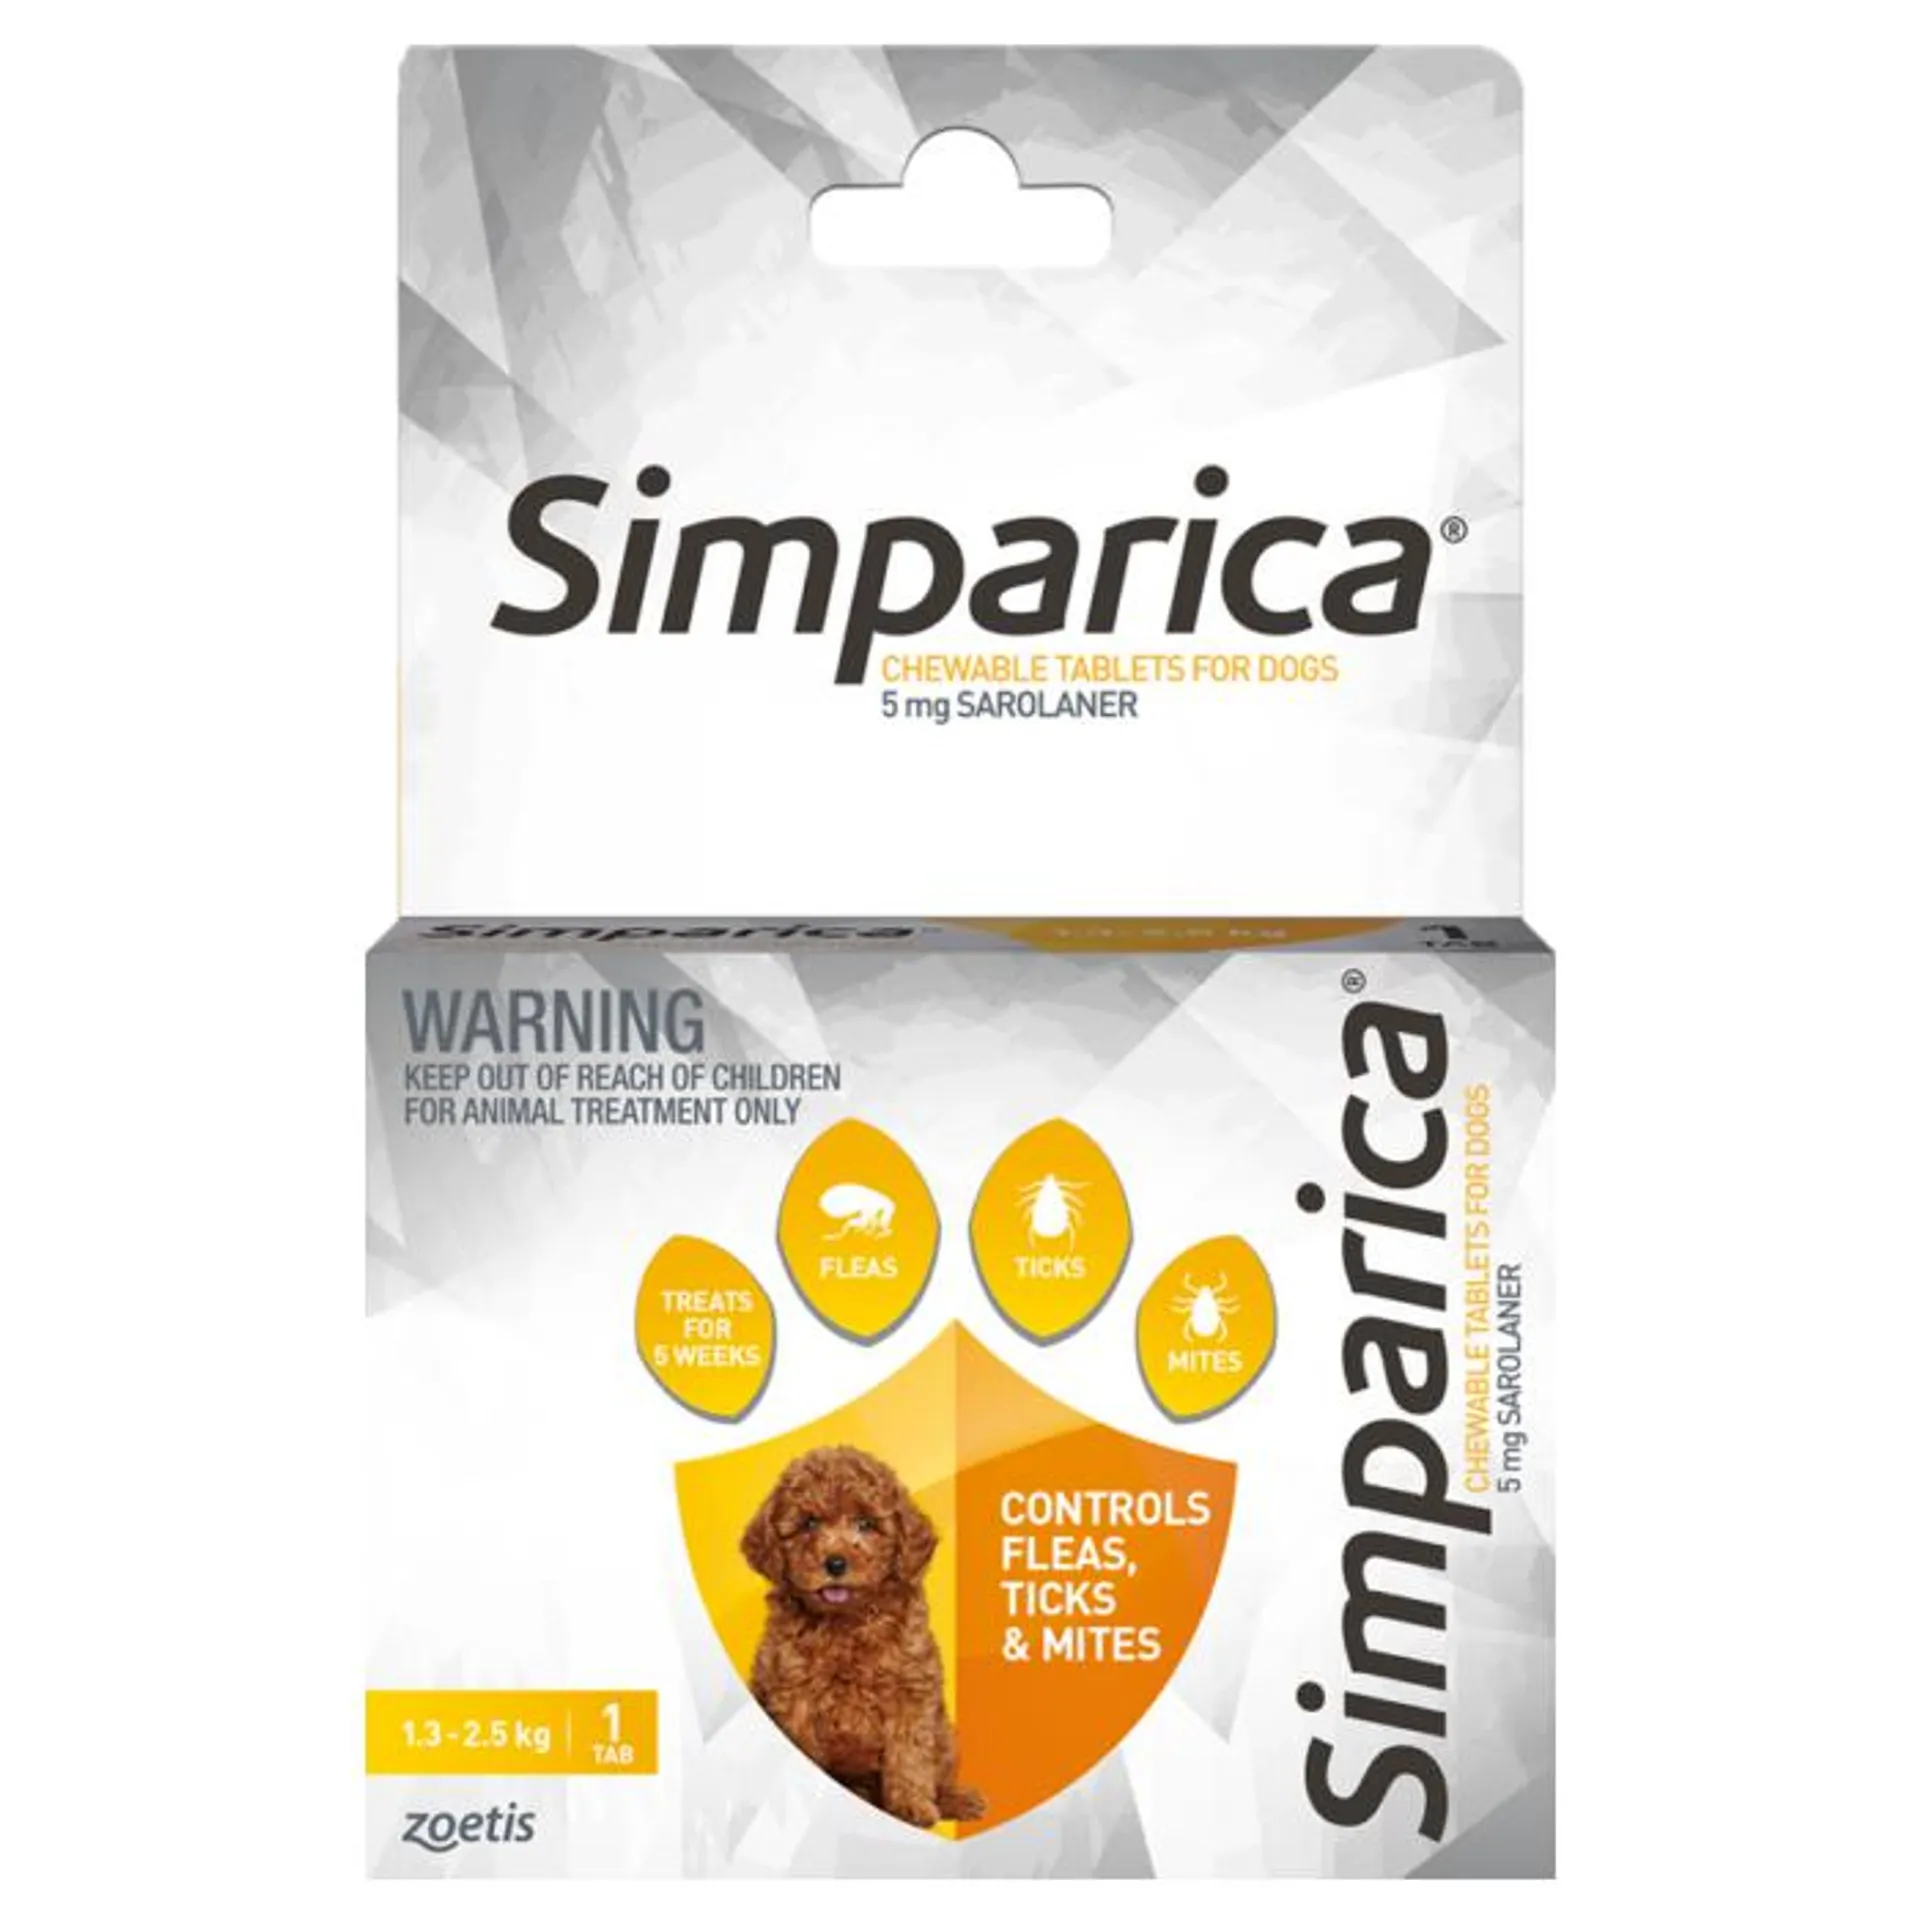 Simparica Flea Treatment For Dogs 1.3kg - 2.5kg - Yellow 1 Pack